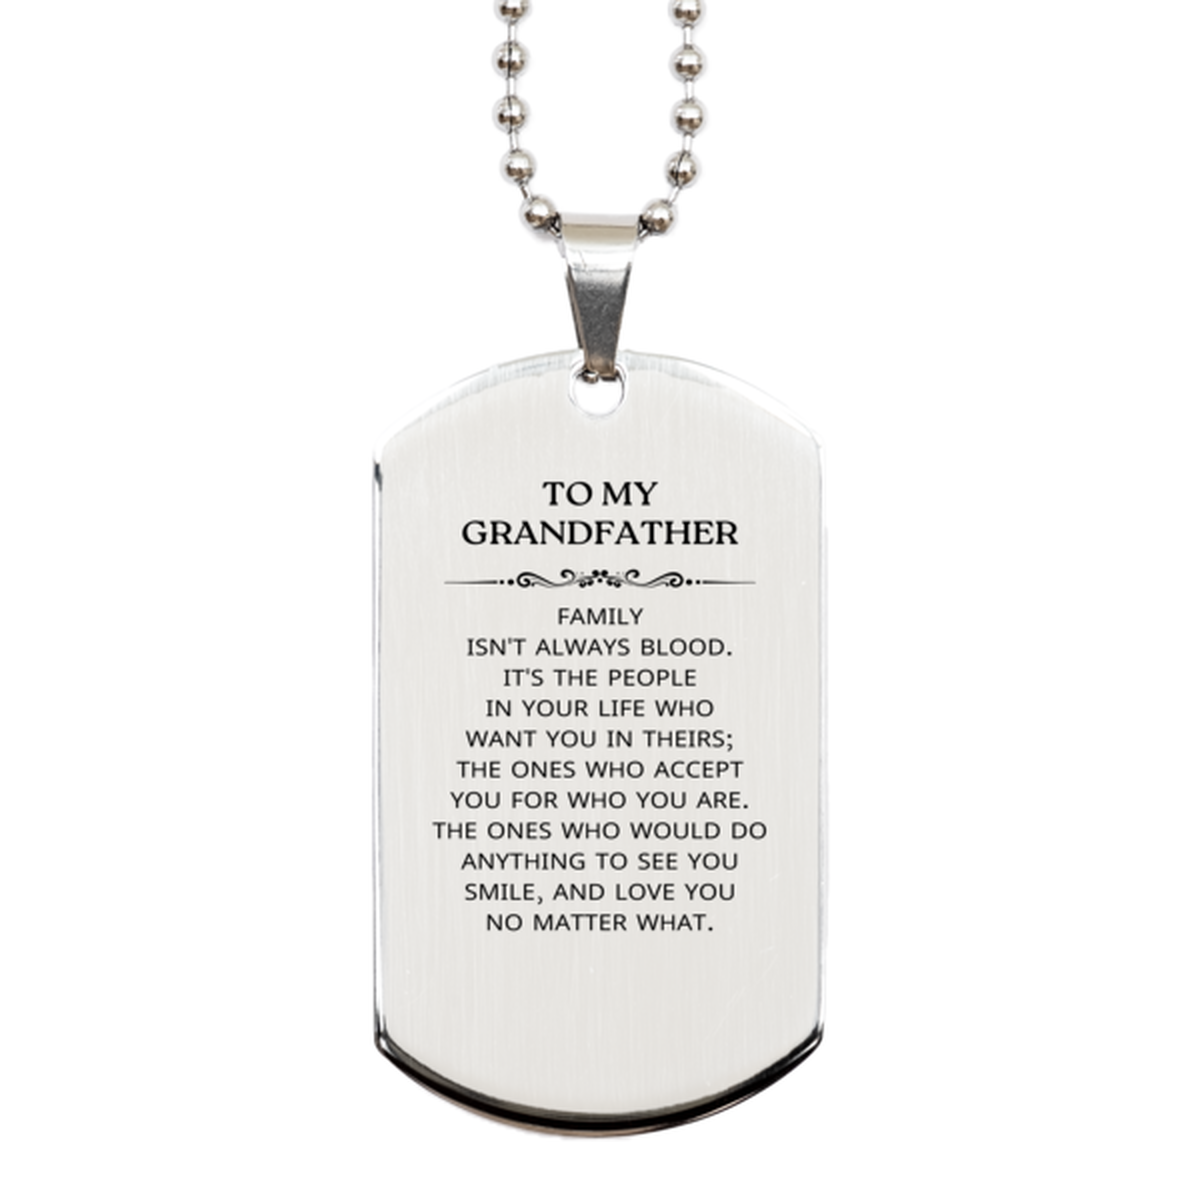 To My Grandfather Gifts, Family isn't always blood, Grandfather Silver Dog Tag, Birthday Christmas Unique Present For Grandfather